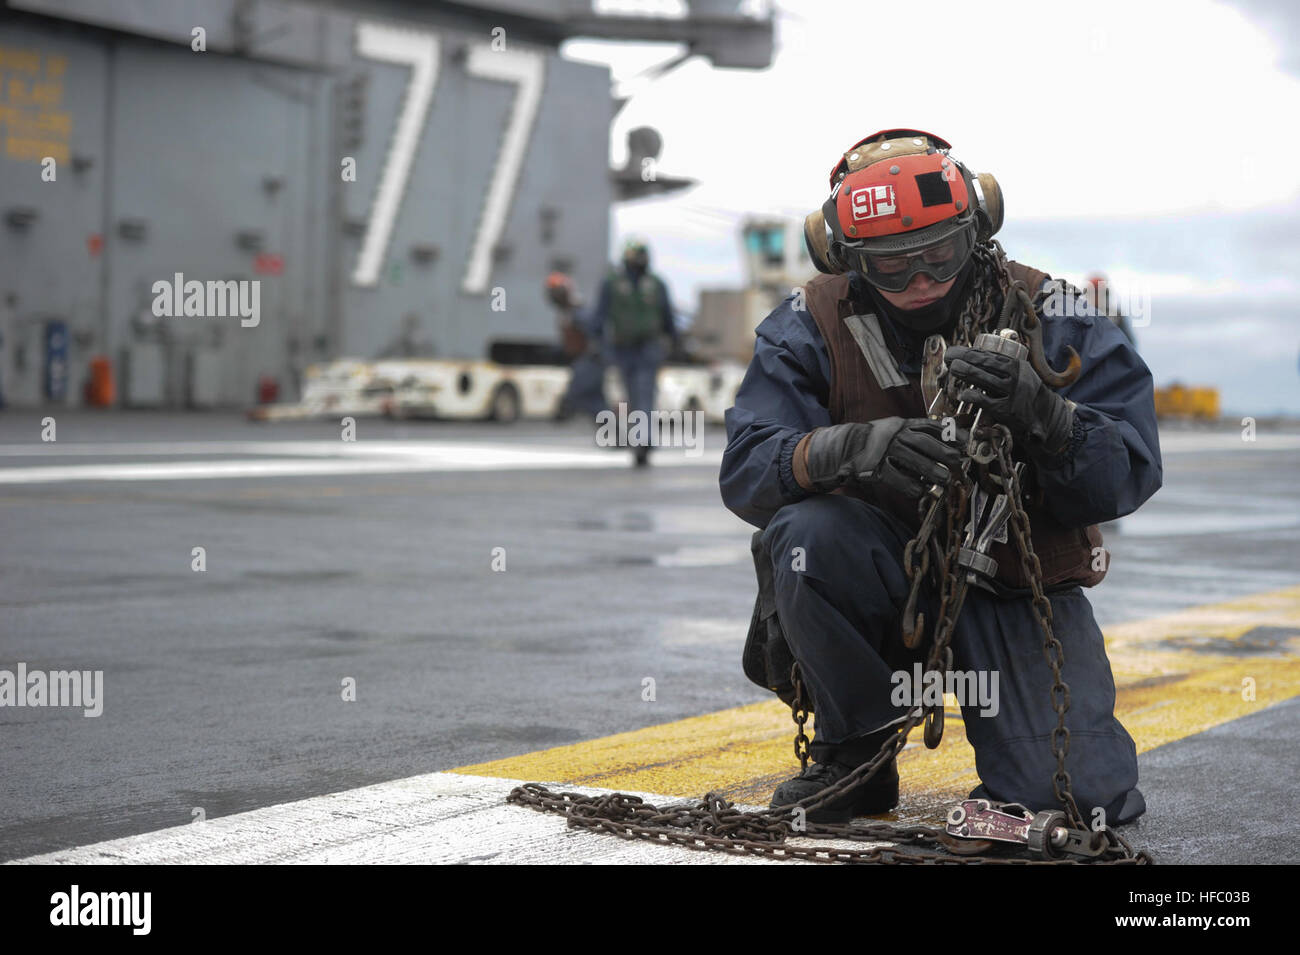 150205-N-IJ275-023  ATLANTIC OCEAN (Feb. 5, 2015) Aviation Ordnanceman Airman Clinton Endl, from Meridian, Wis., puts chains away on the flight deck aboard the aircraft carrier USS George H.W. Bush (CVN 77). George H.W. Bush is conducting training operations in the Atlantic Ocean.  (U.S. Navy photo by Mass Communication Specialist Seaman Ciarra C. Thibodeaux/Released) George H.W. Bush is conducting training operations in the Atlantic Ocean 150205-N-IJ275-023 Stock Photo